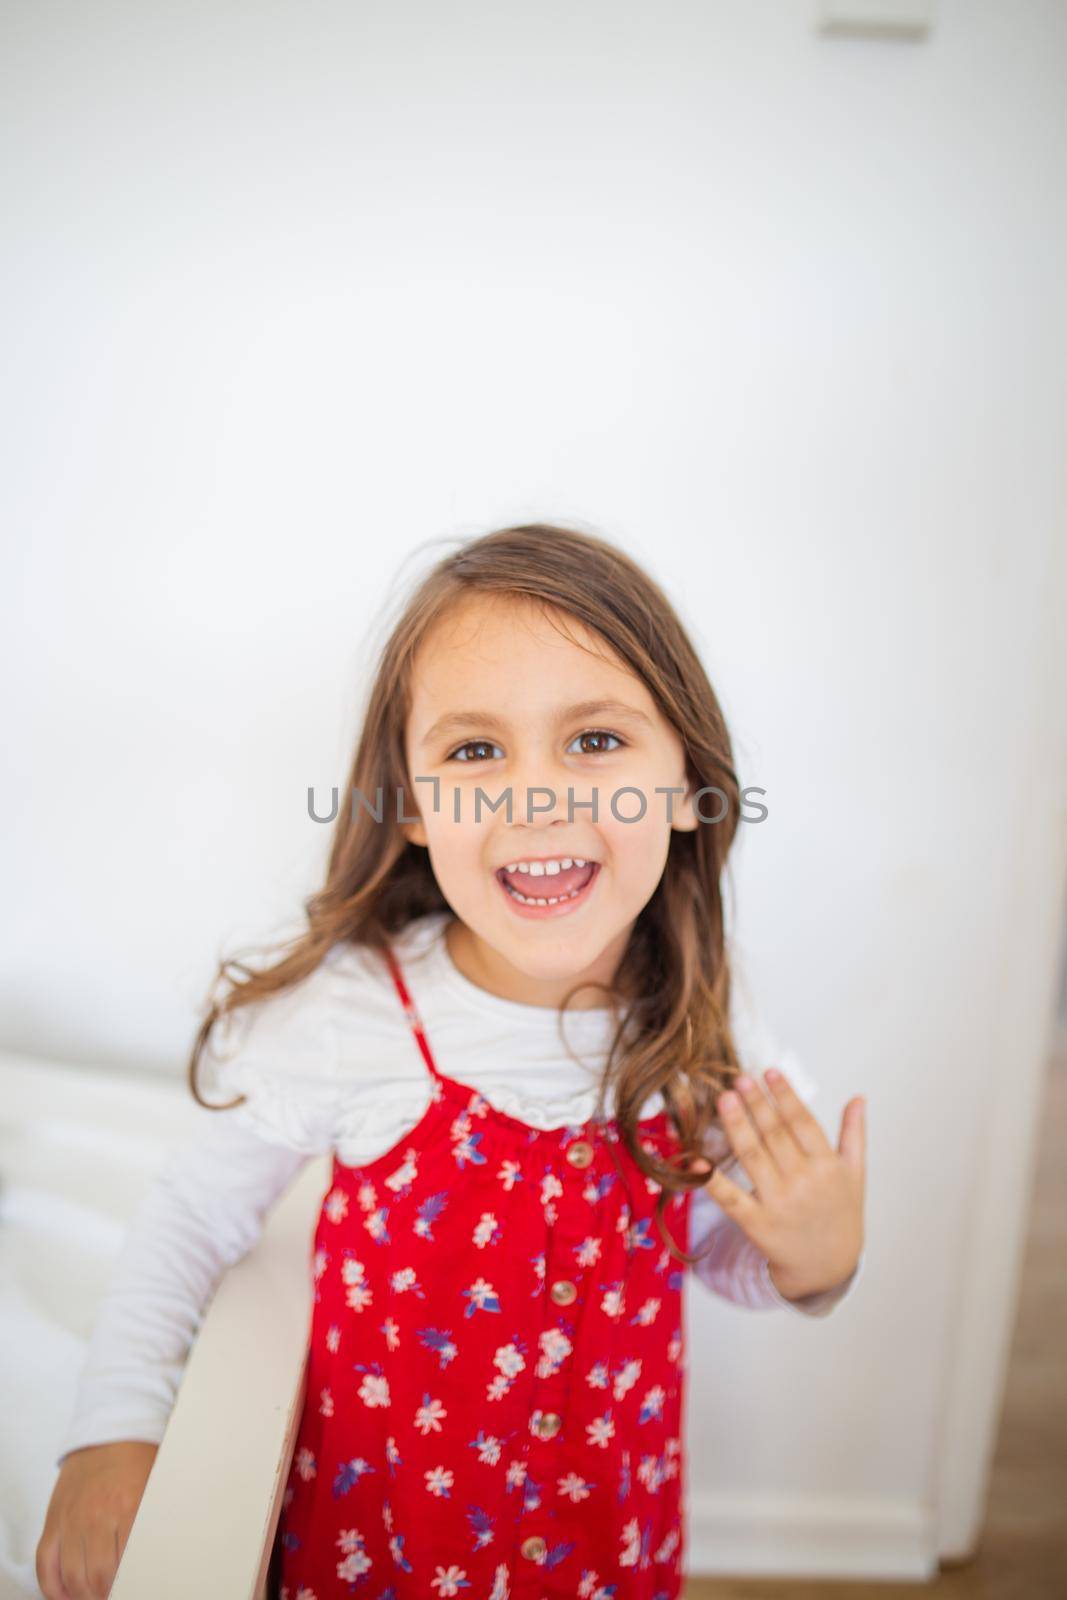 Cute little girl inside white room smiling and wearing red-flowered dress. Portrait of joyful young child in front of white wall. Happy kids at home